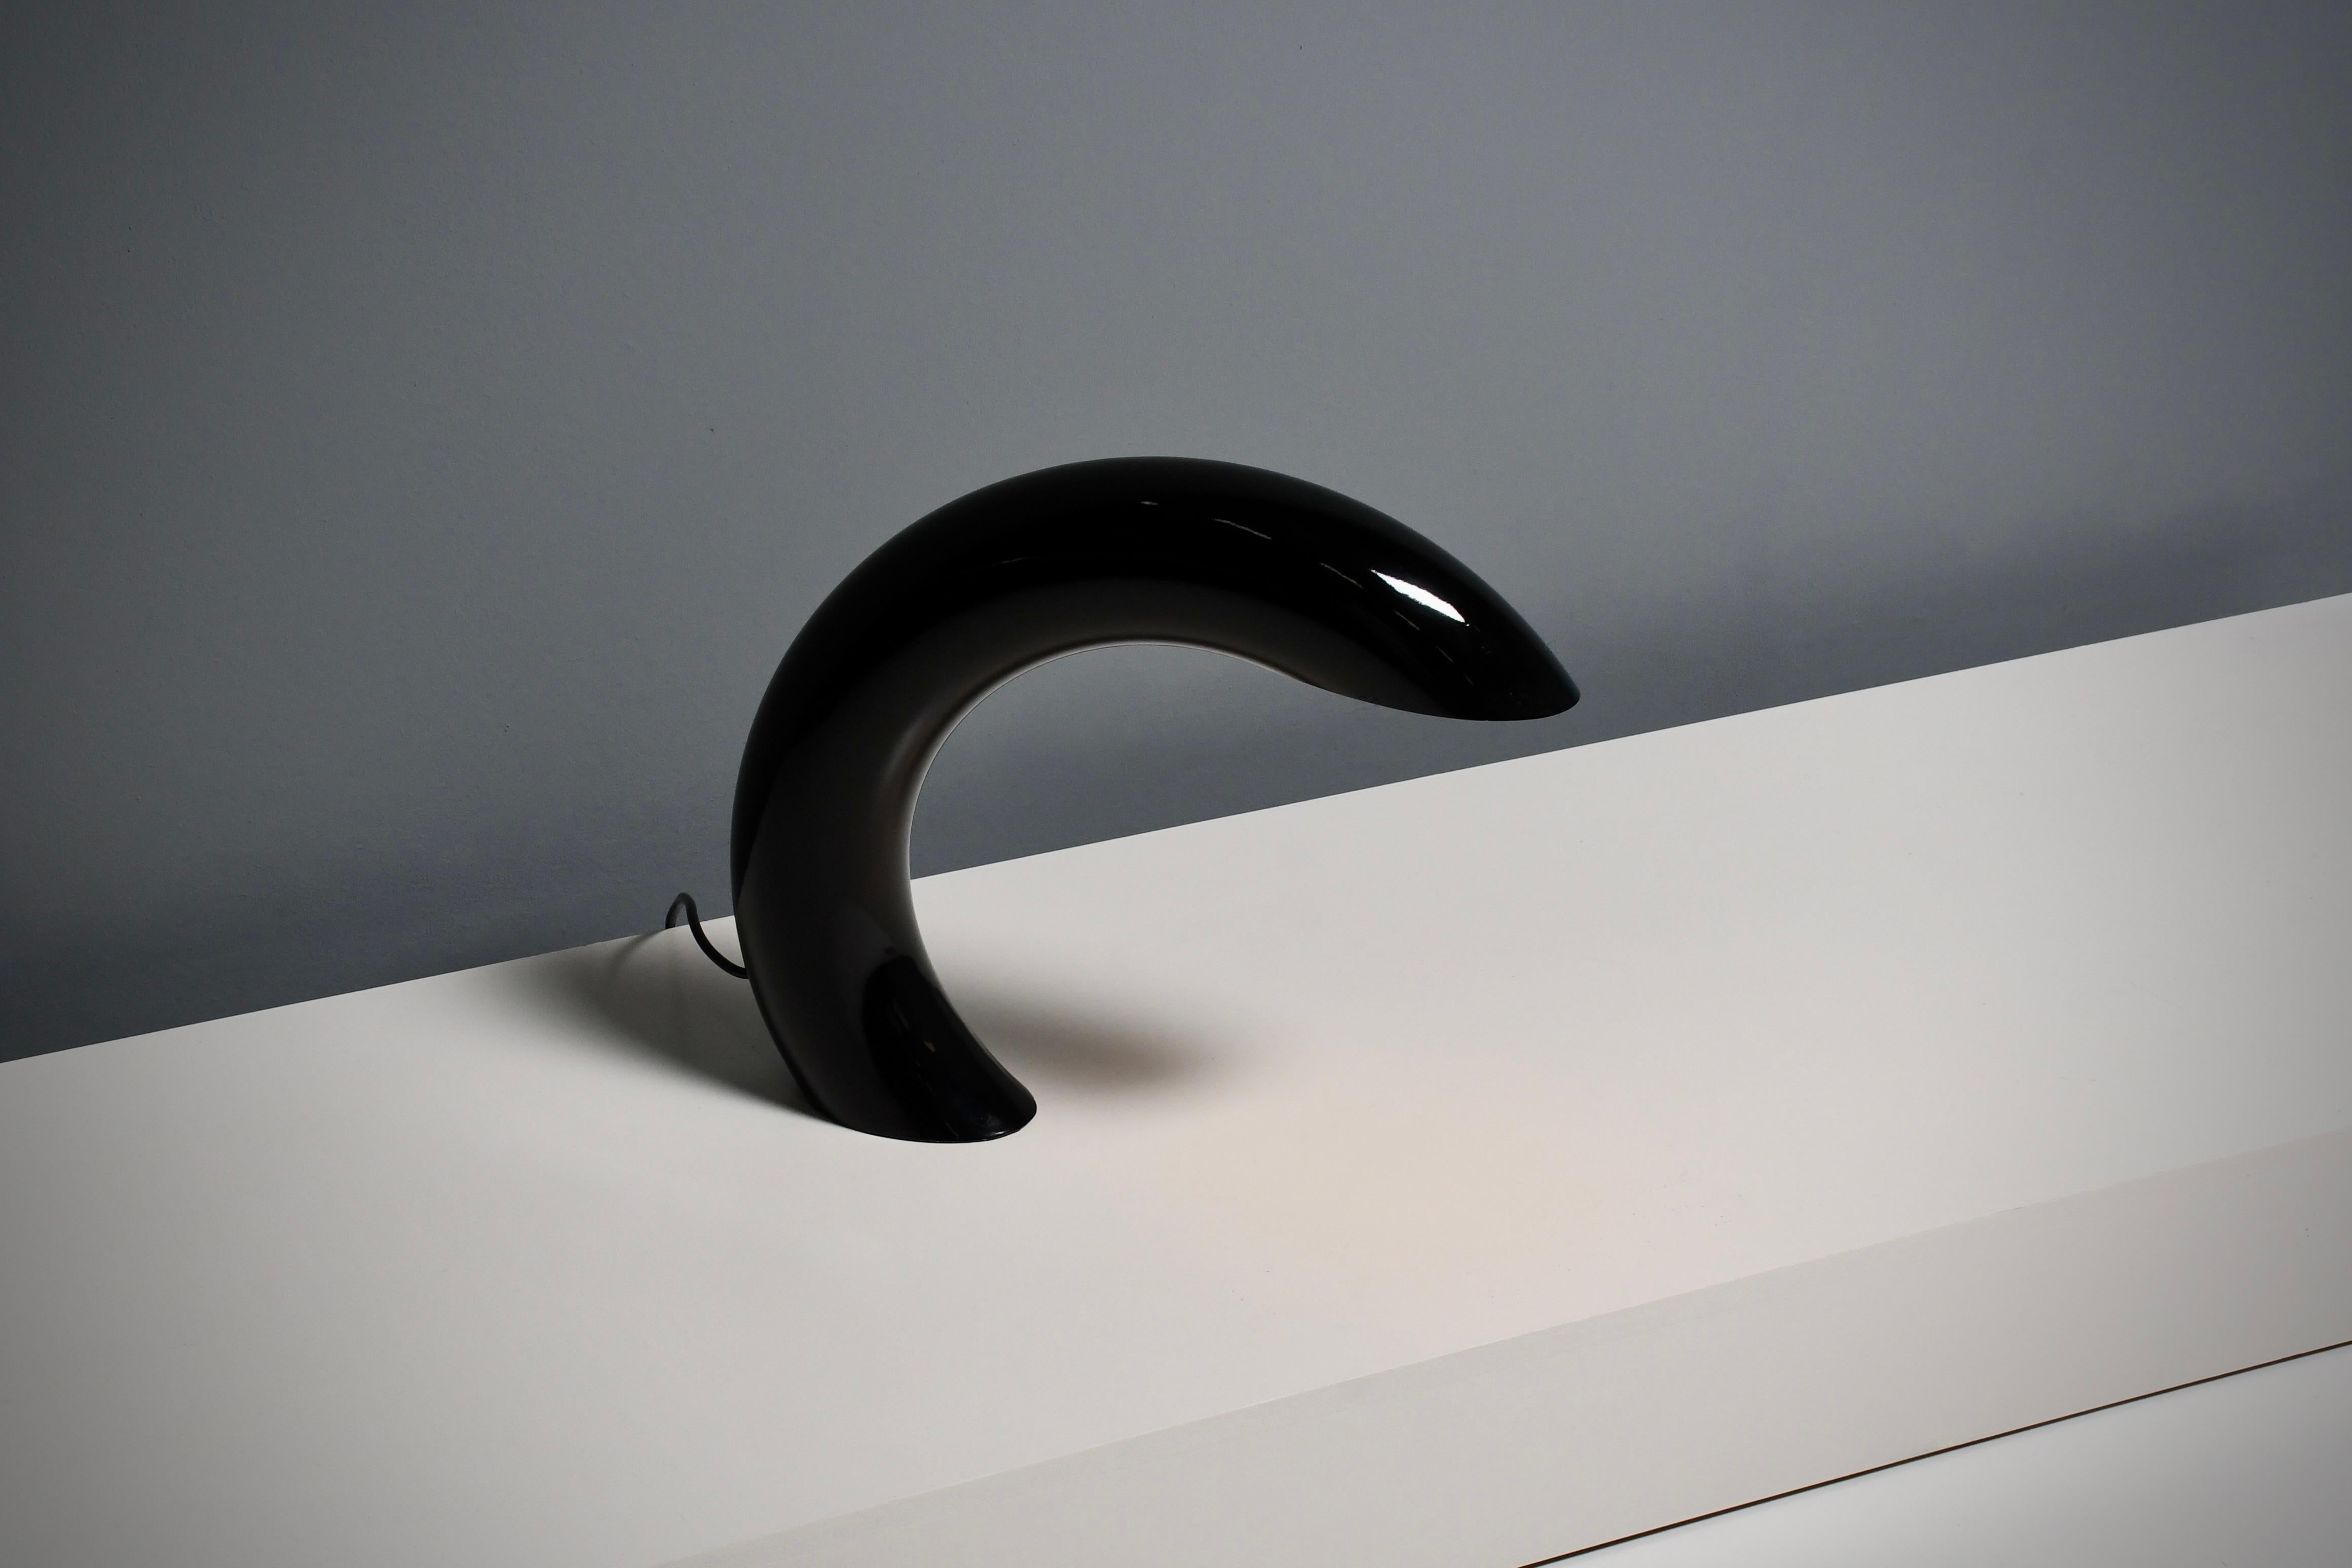 Sculptural shaped table lamp in very good condition.

Designed by Georges Frydman, France 1960s.

This lamp is a masterpiece of minimalistic elegance. 
Crafted from a solid circular tube of heavy cast aluminum, this sculptural table lamp stands as a